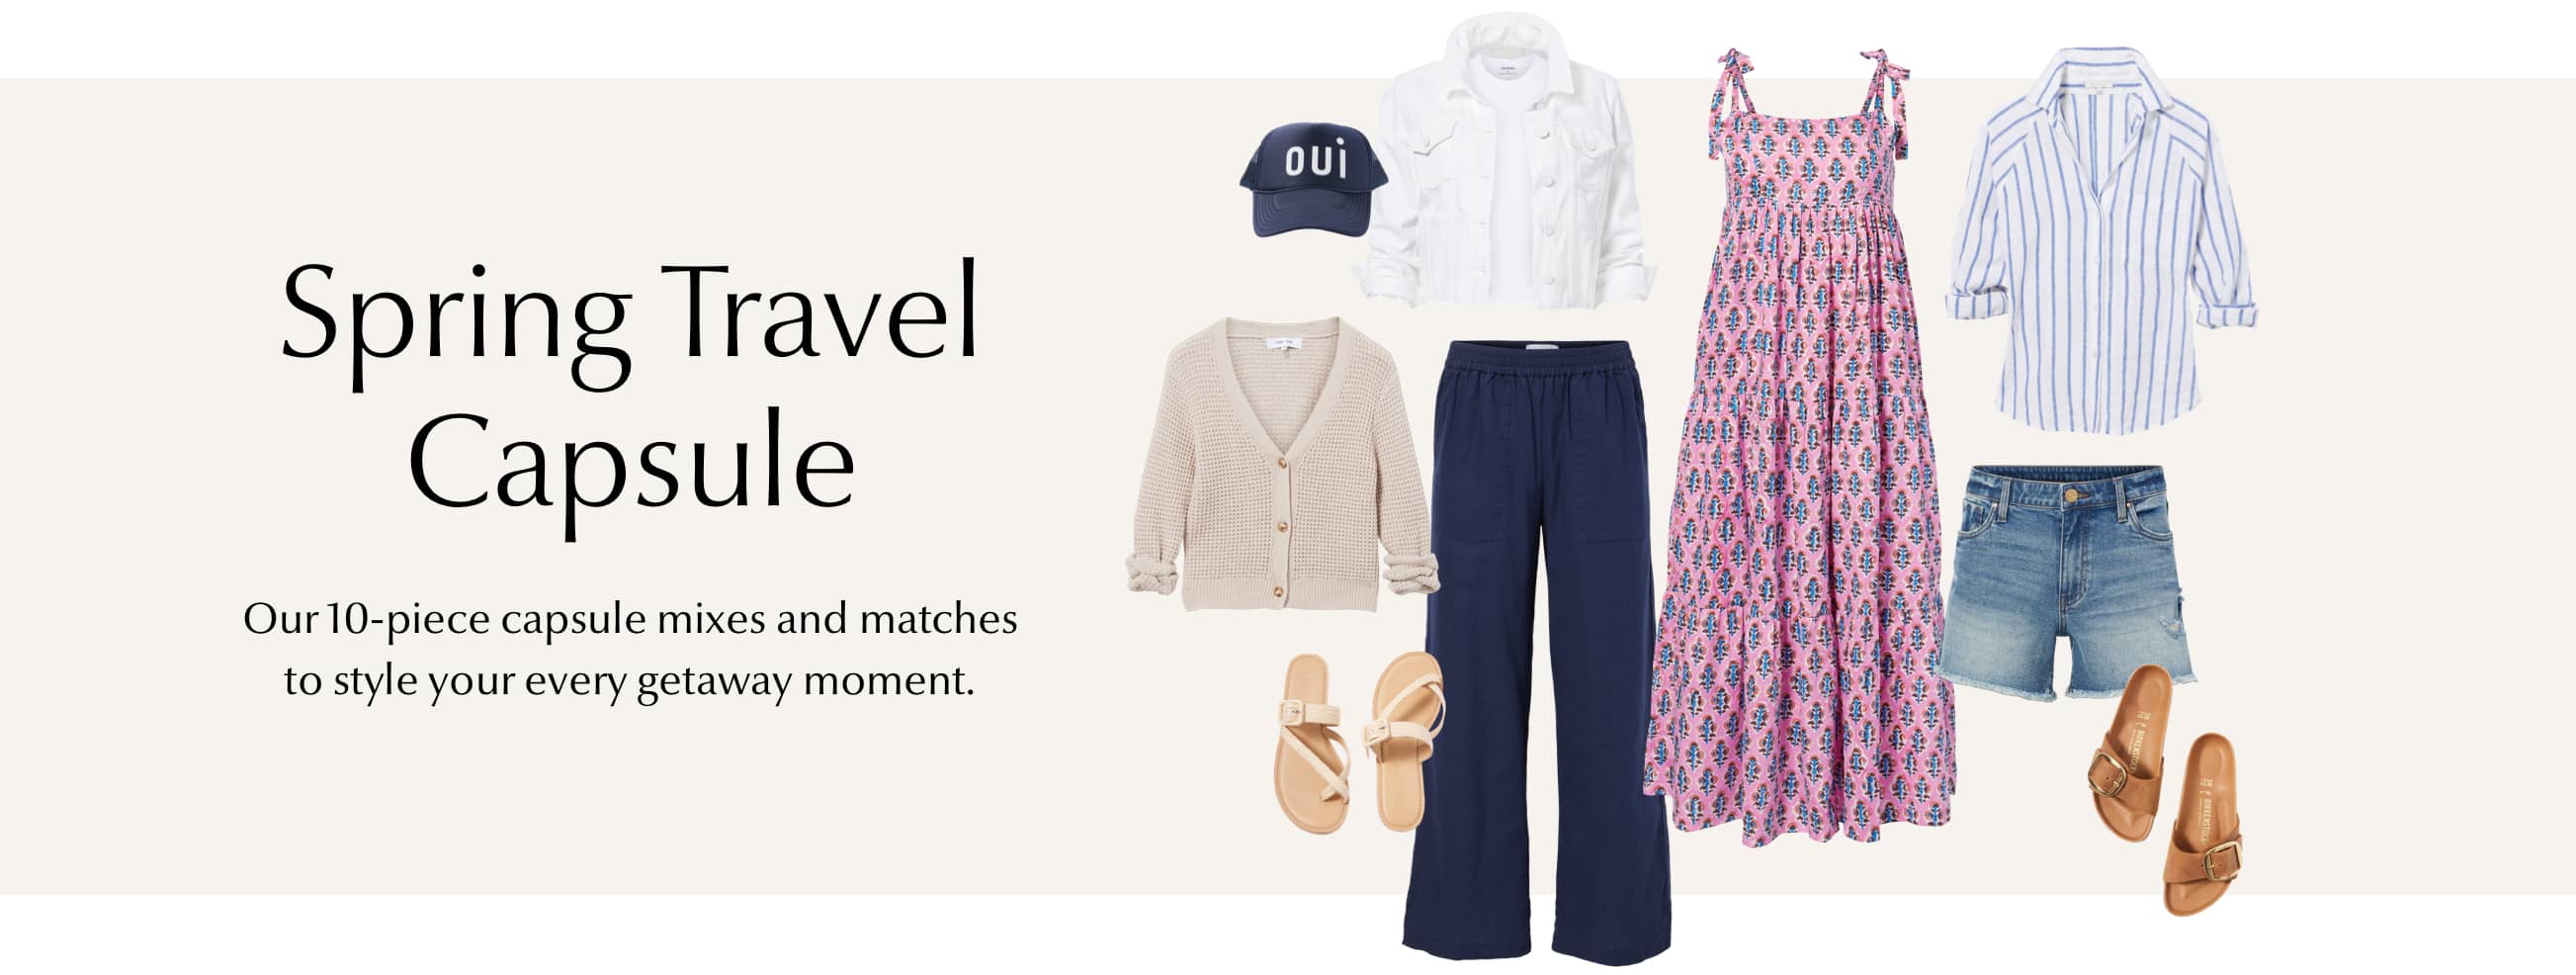 Our 10-piece capsule mixes and matches to style your every getaway moment. Shop now. 